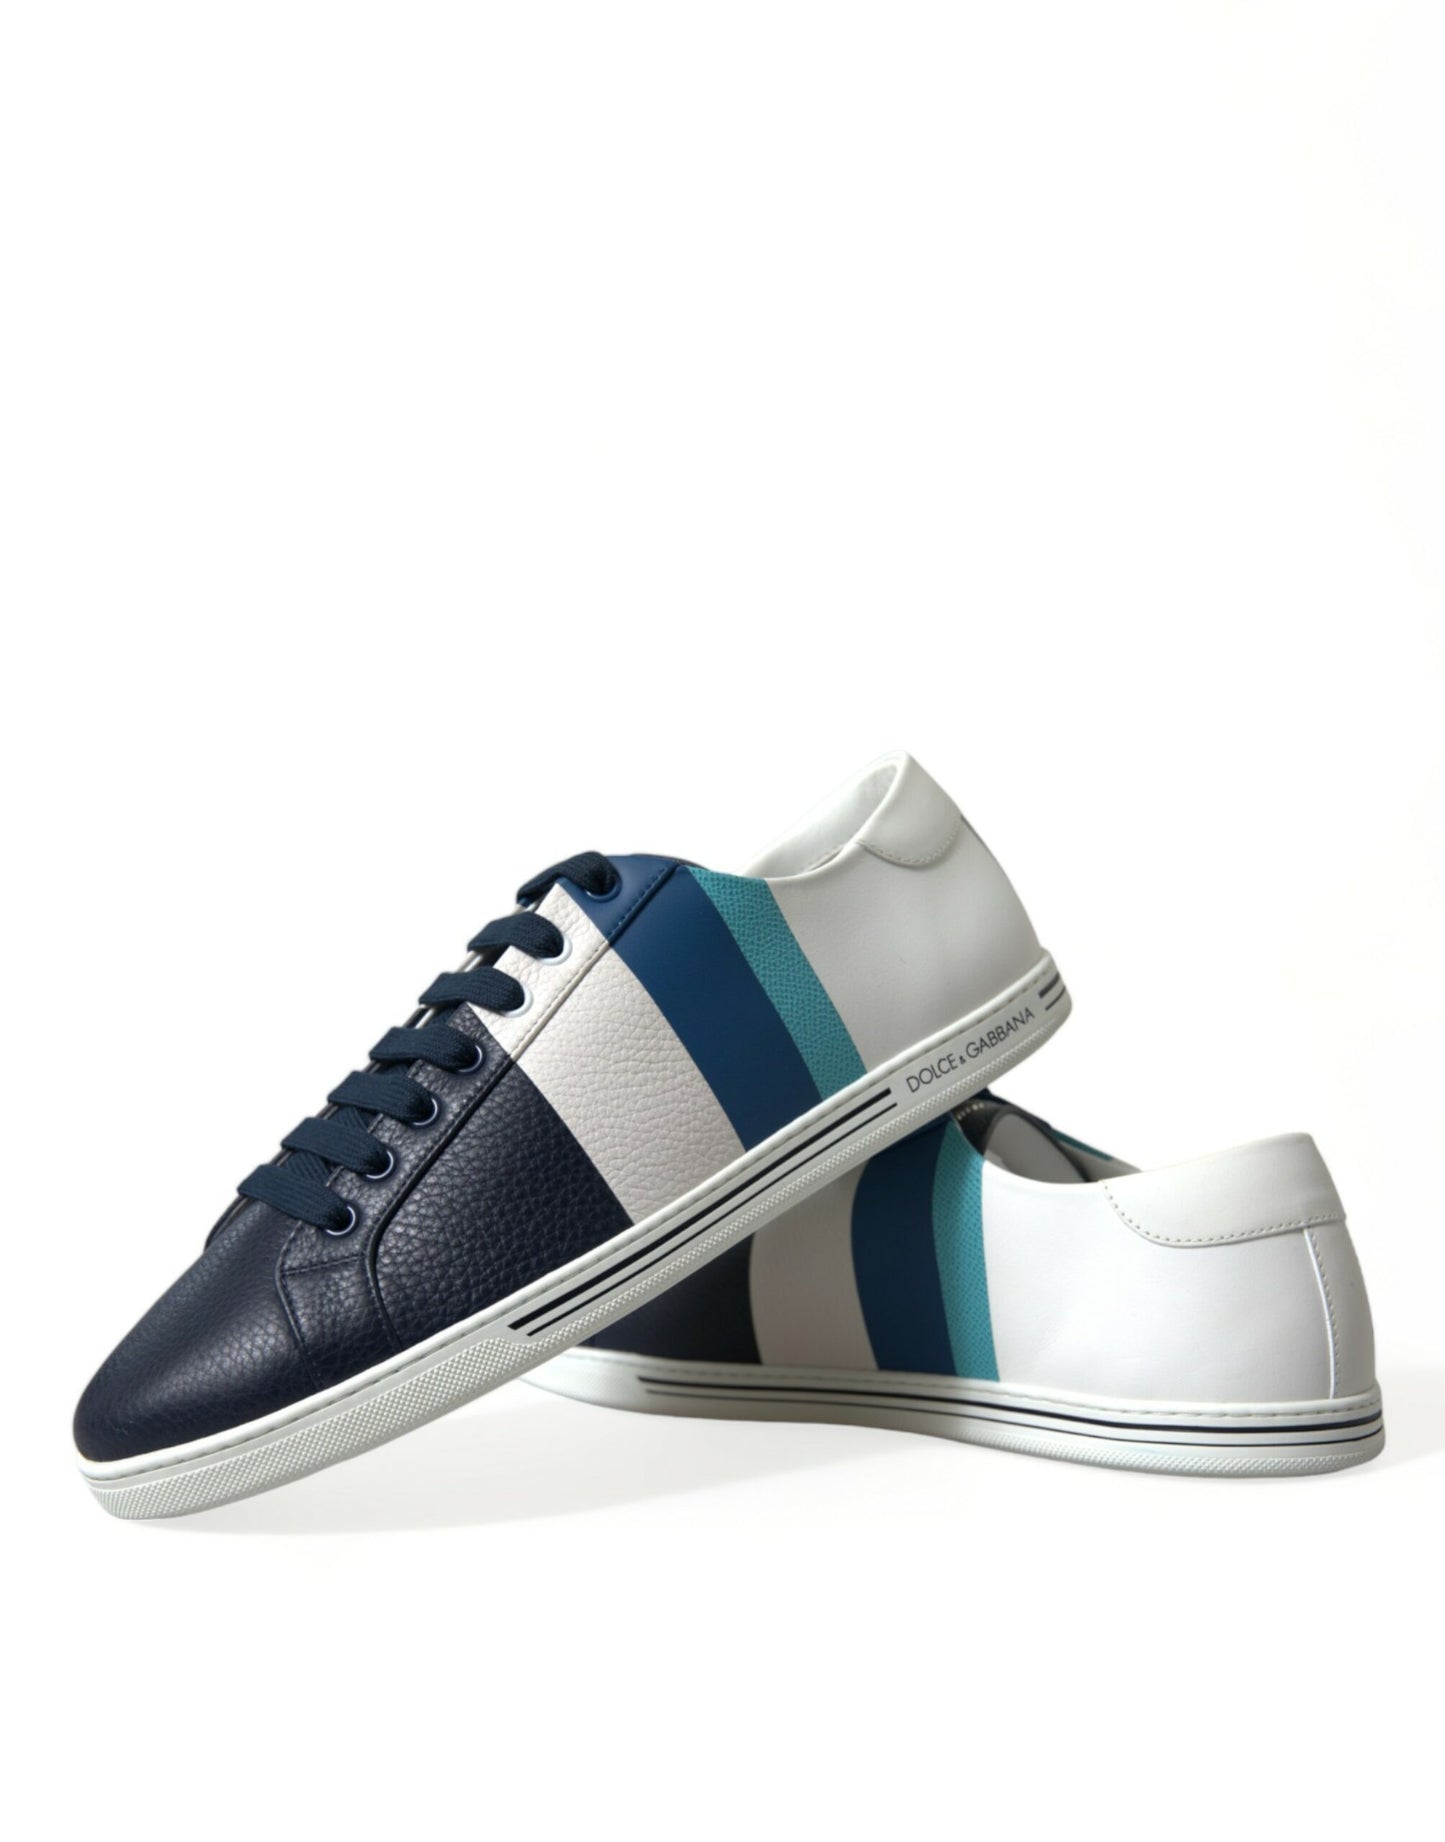 Elegant White and Blue Leather Sneakers